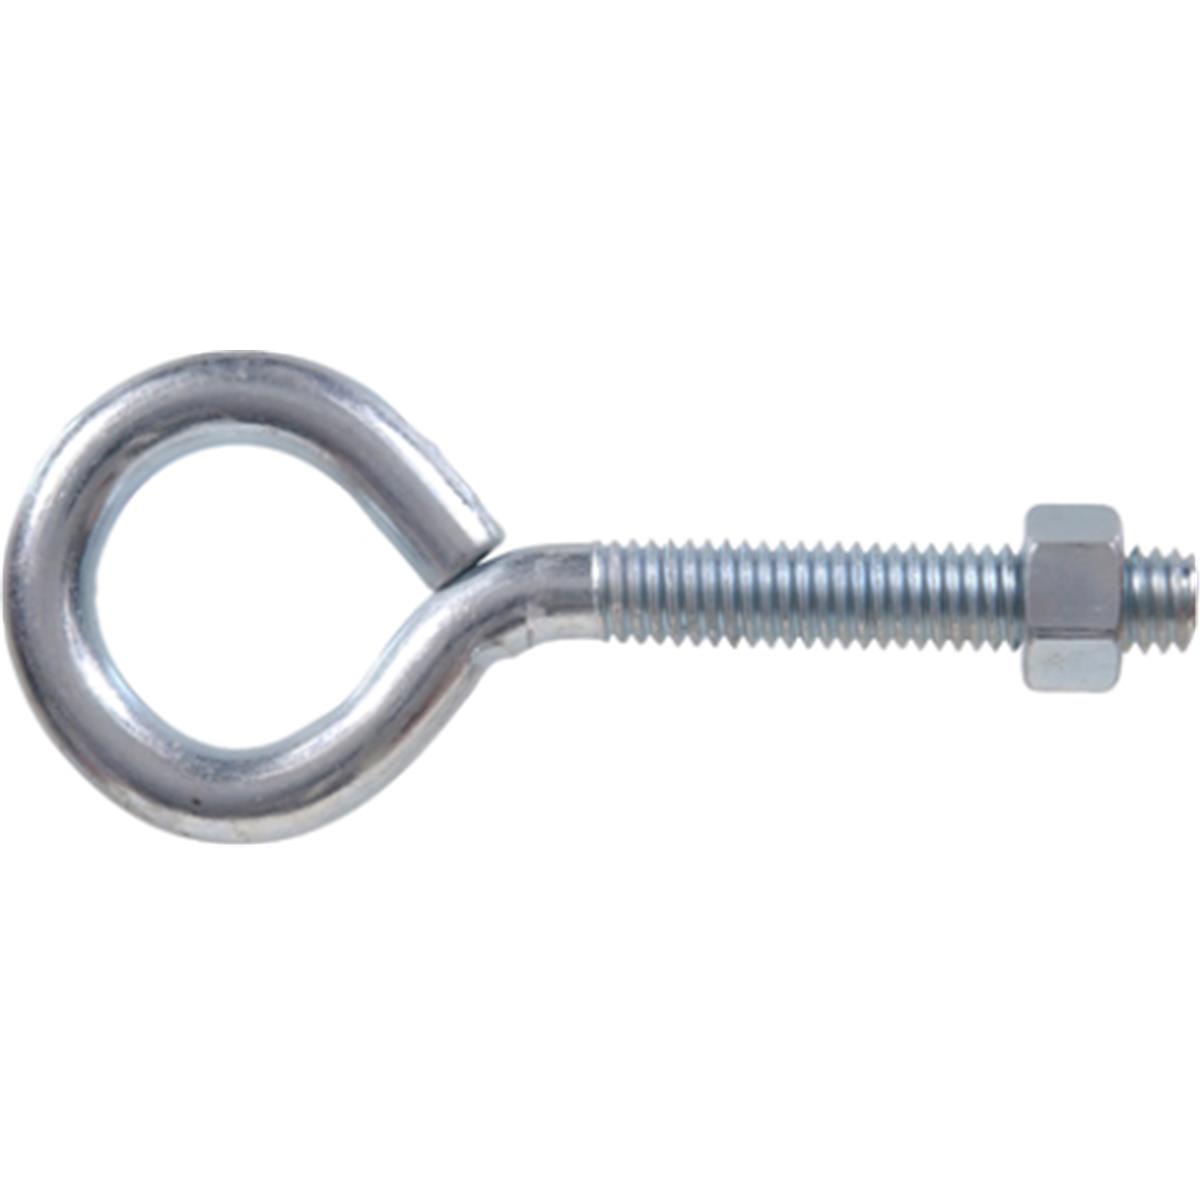 0.62-11 X 6 In. Zinc Plated Eyebolt With Nut - Pack Of 3